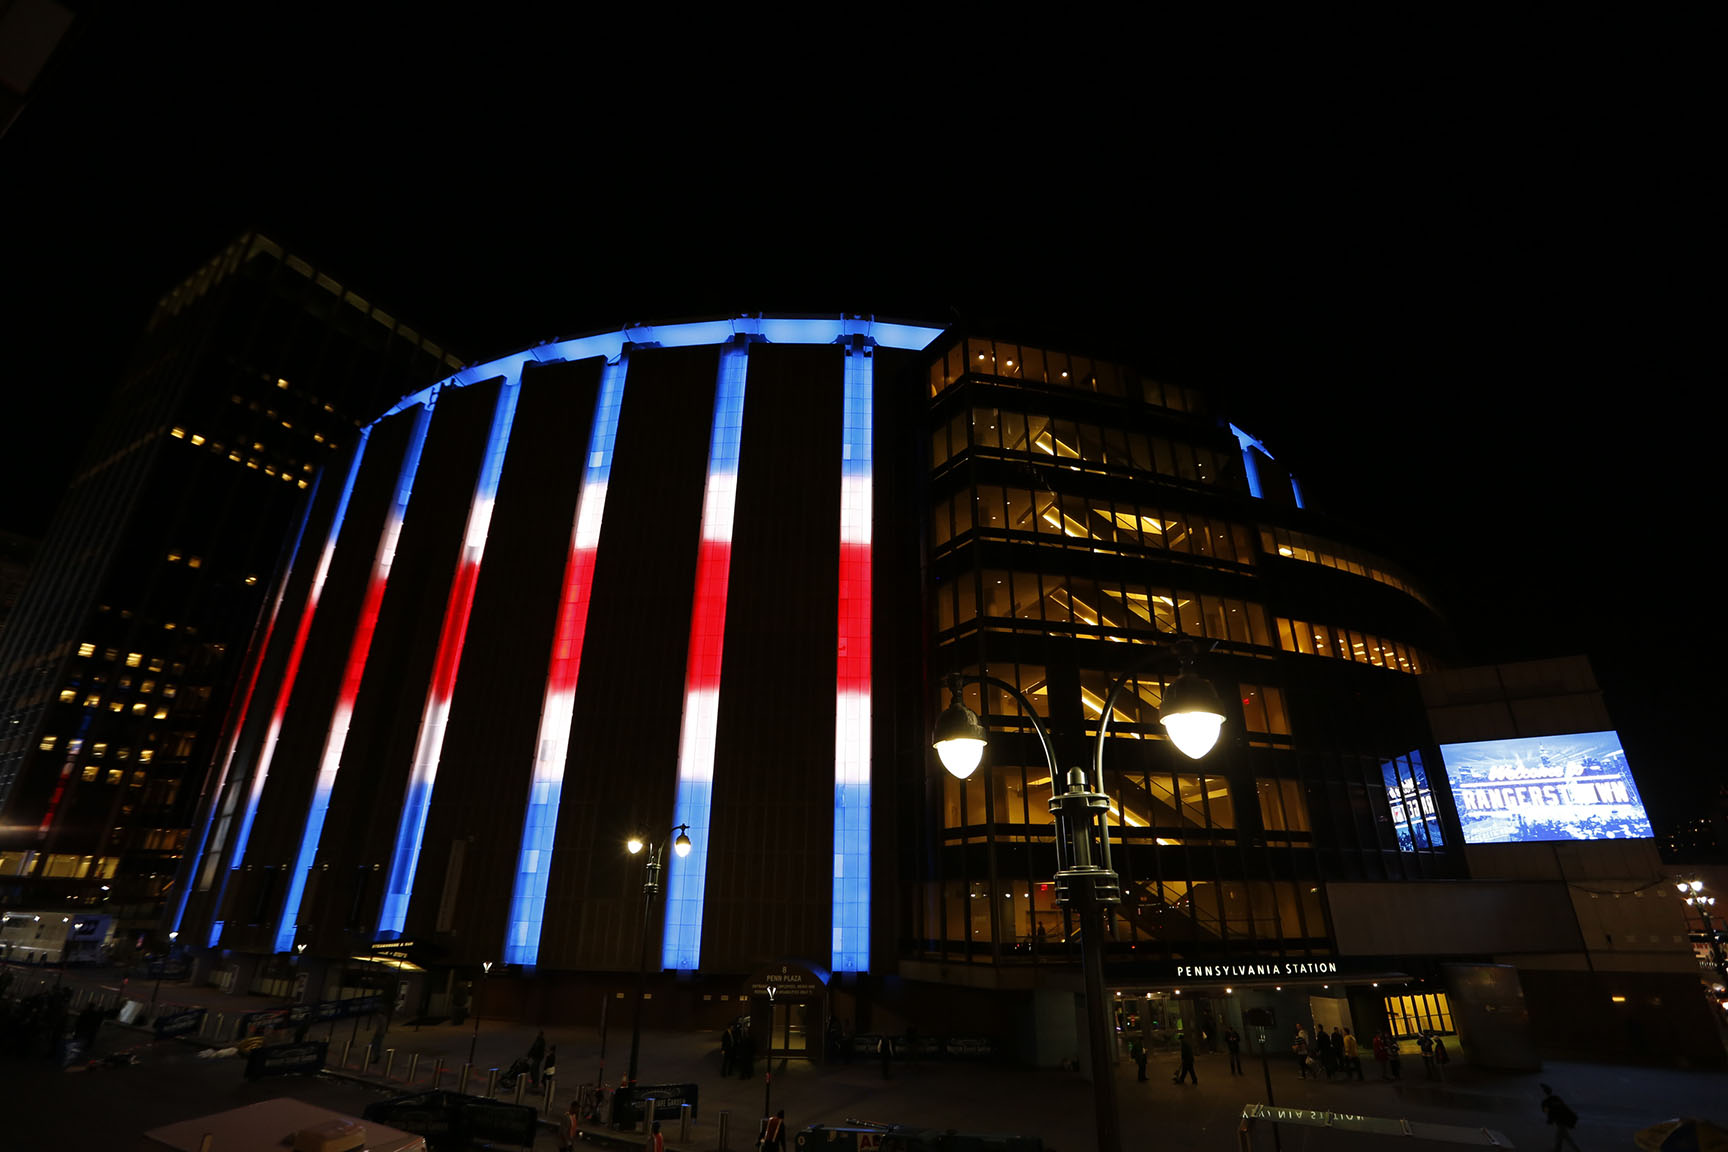 October 12, 2014: The New York Rangers face The Toronto Maple Leafs during their home opener game at Madison Square Garden in New York City.